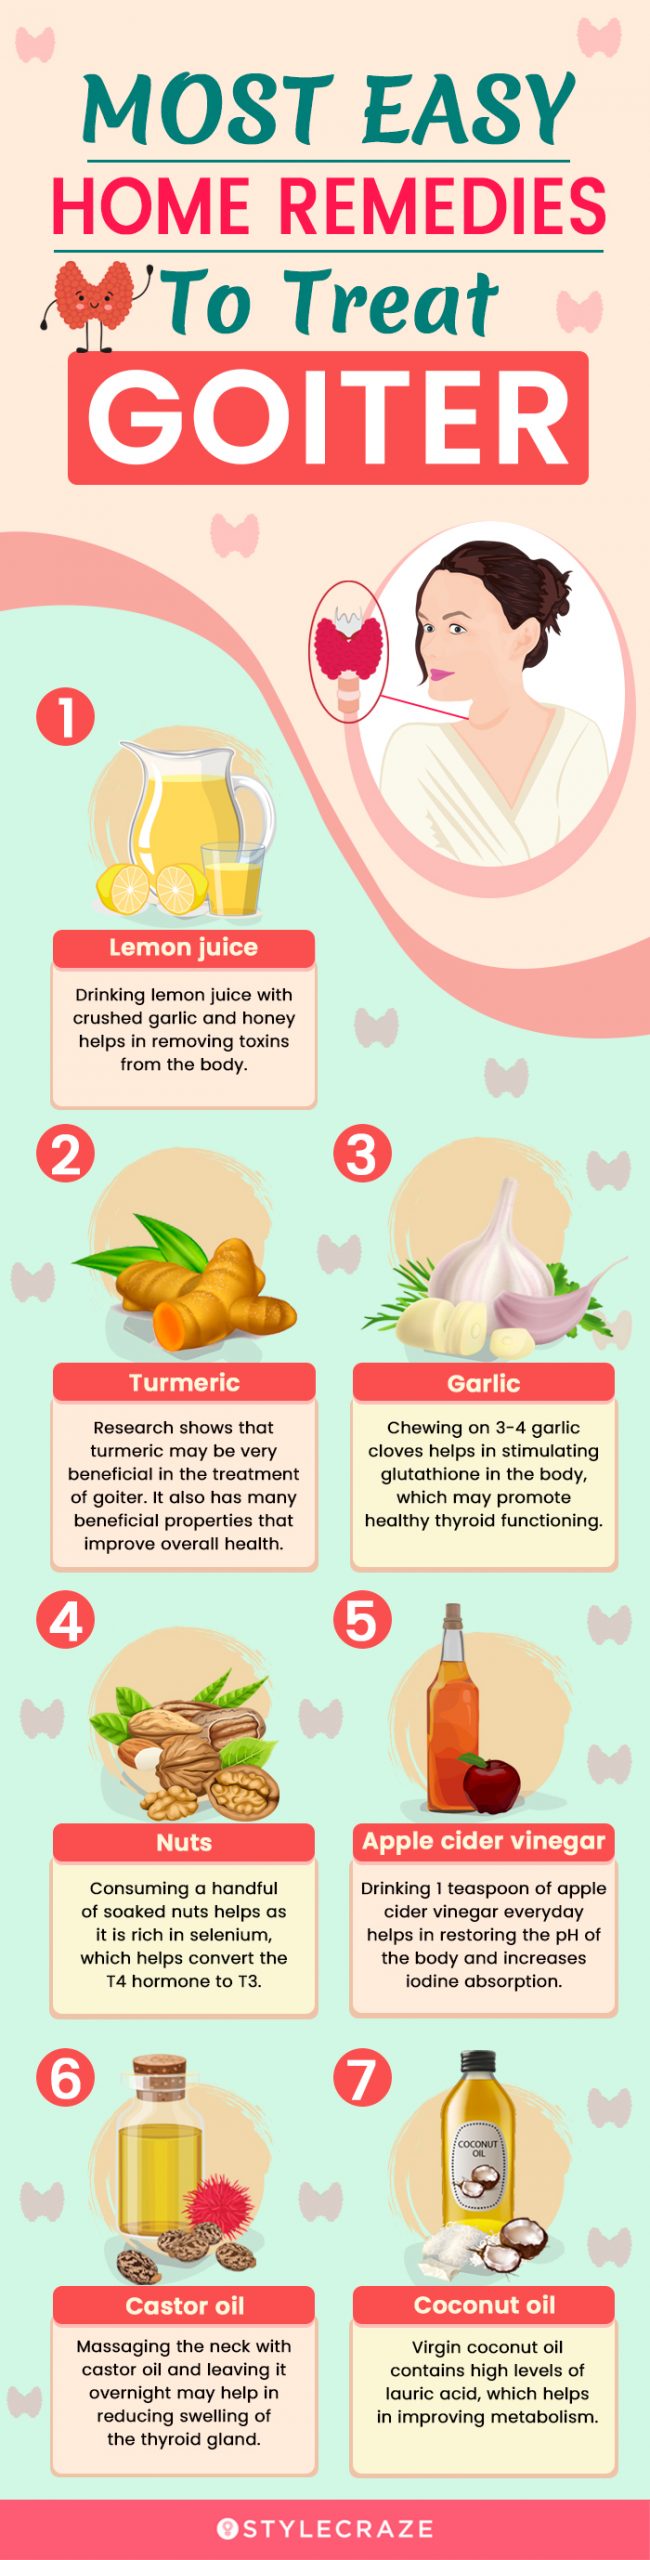 most easy home remedies to treat goiter (infographic)